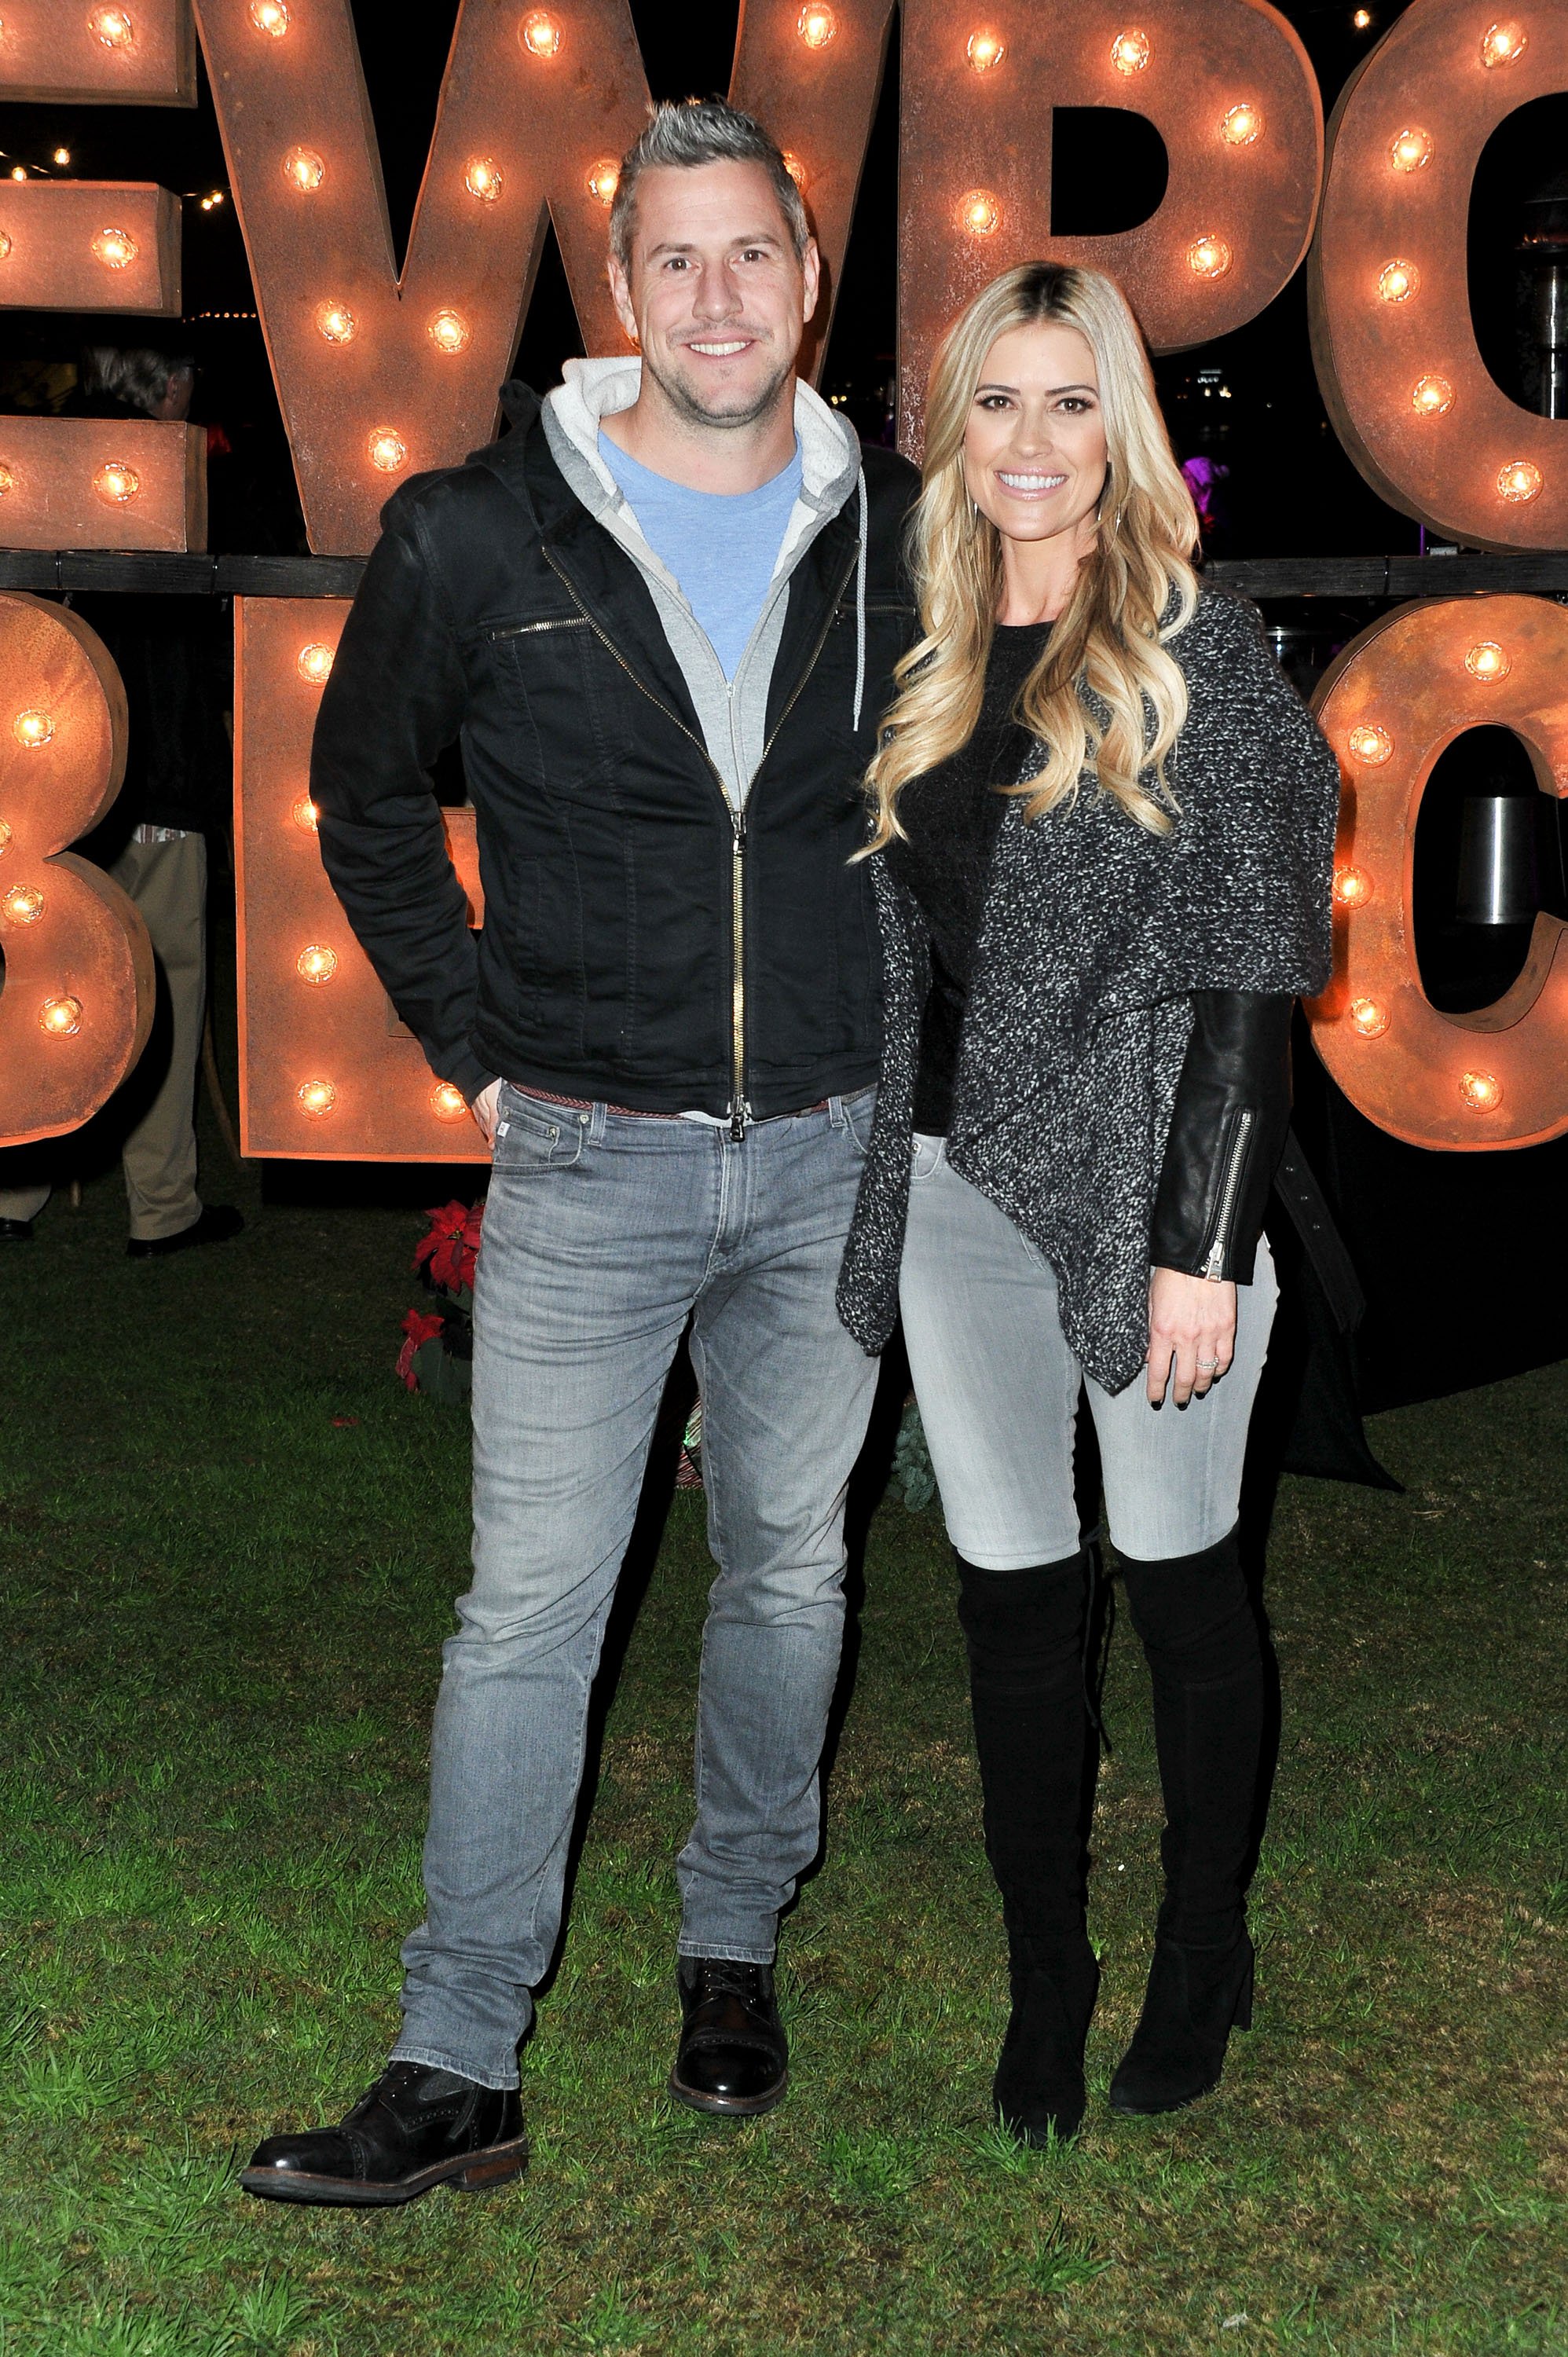 Christina Anstead and Ant Anstead attend the 111th Annual Newport Beach Christmas Boat Parade opening night on December 18, 2019, in Newport Beach, California. | Source: Getty Images